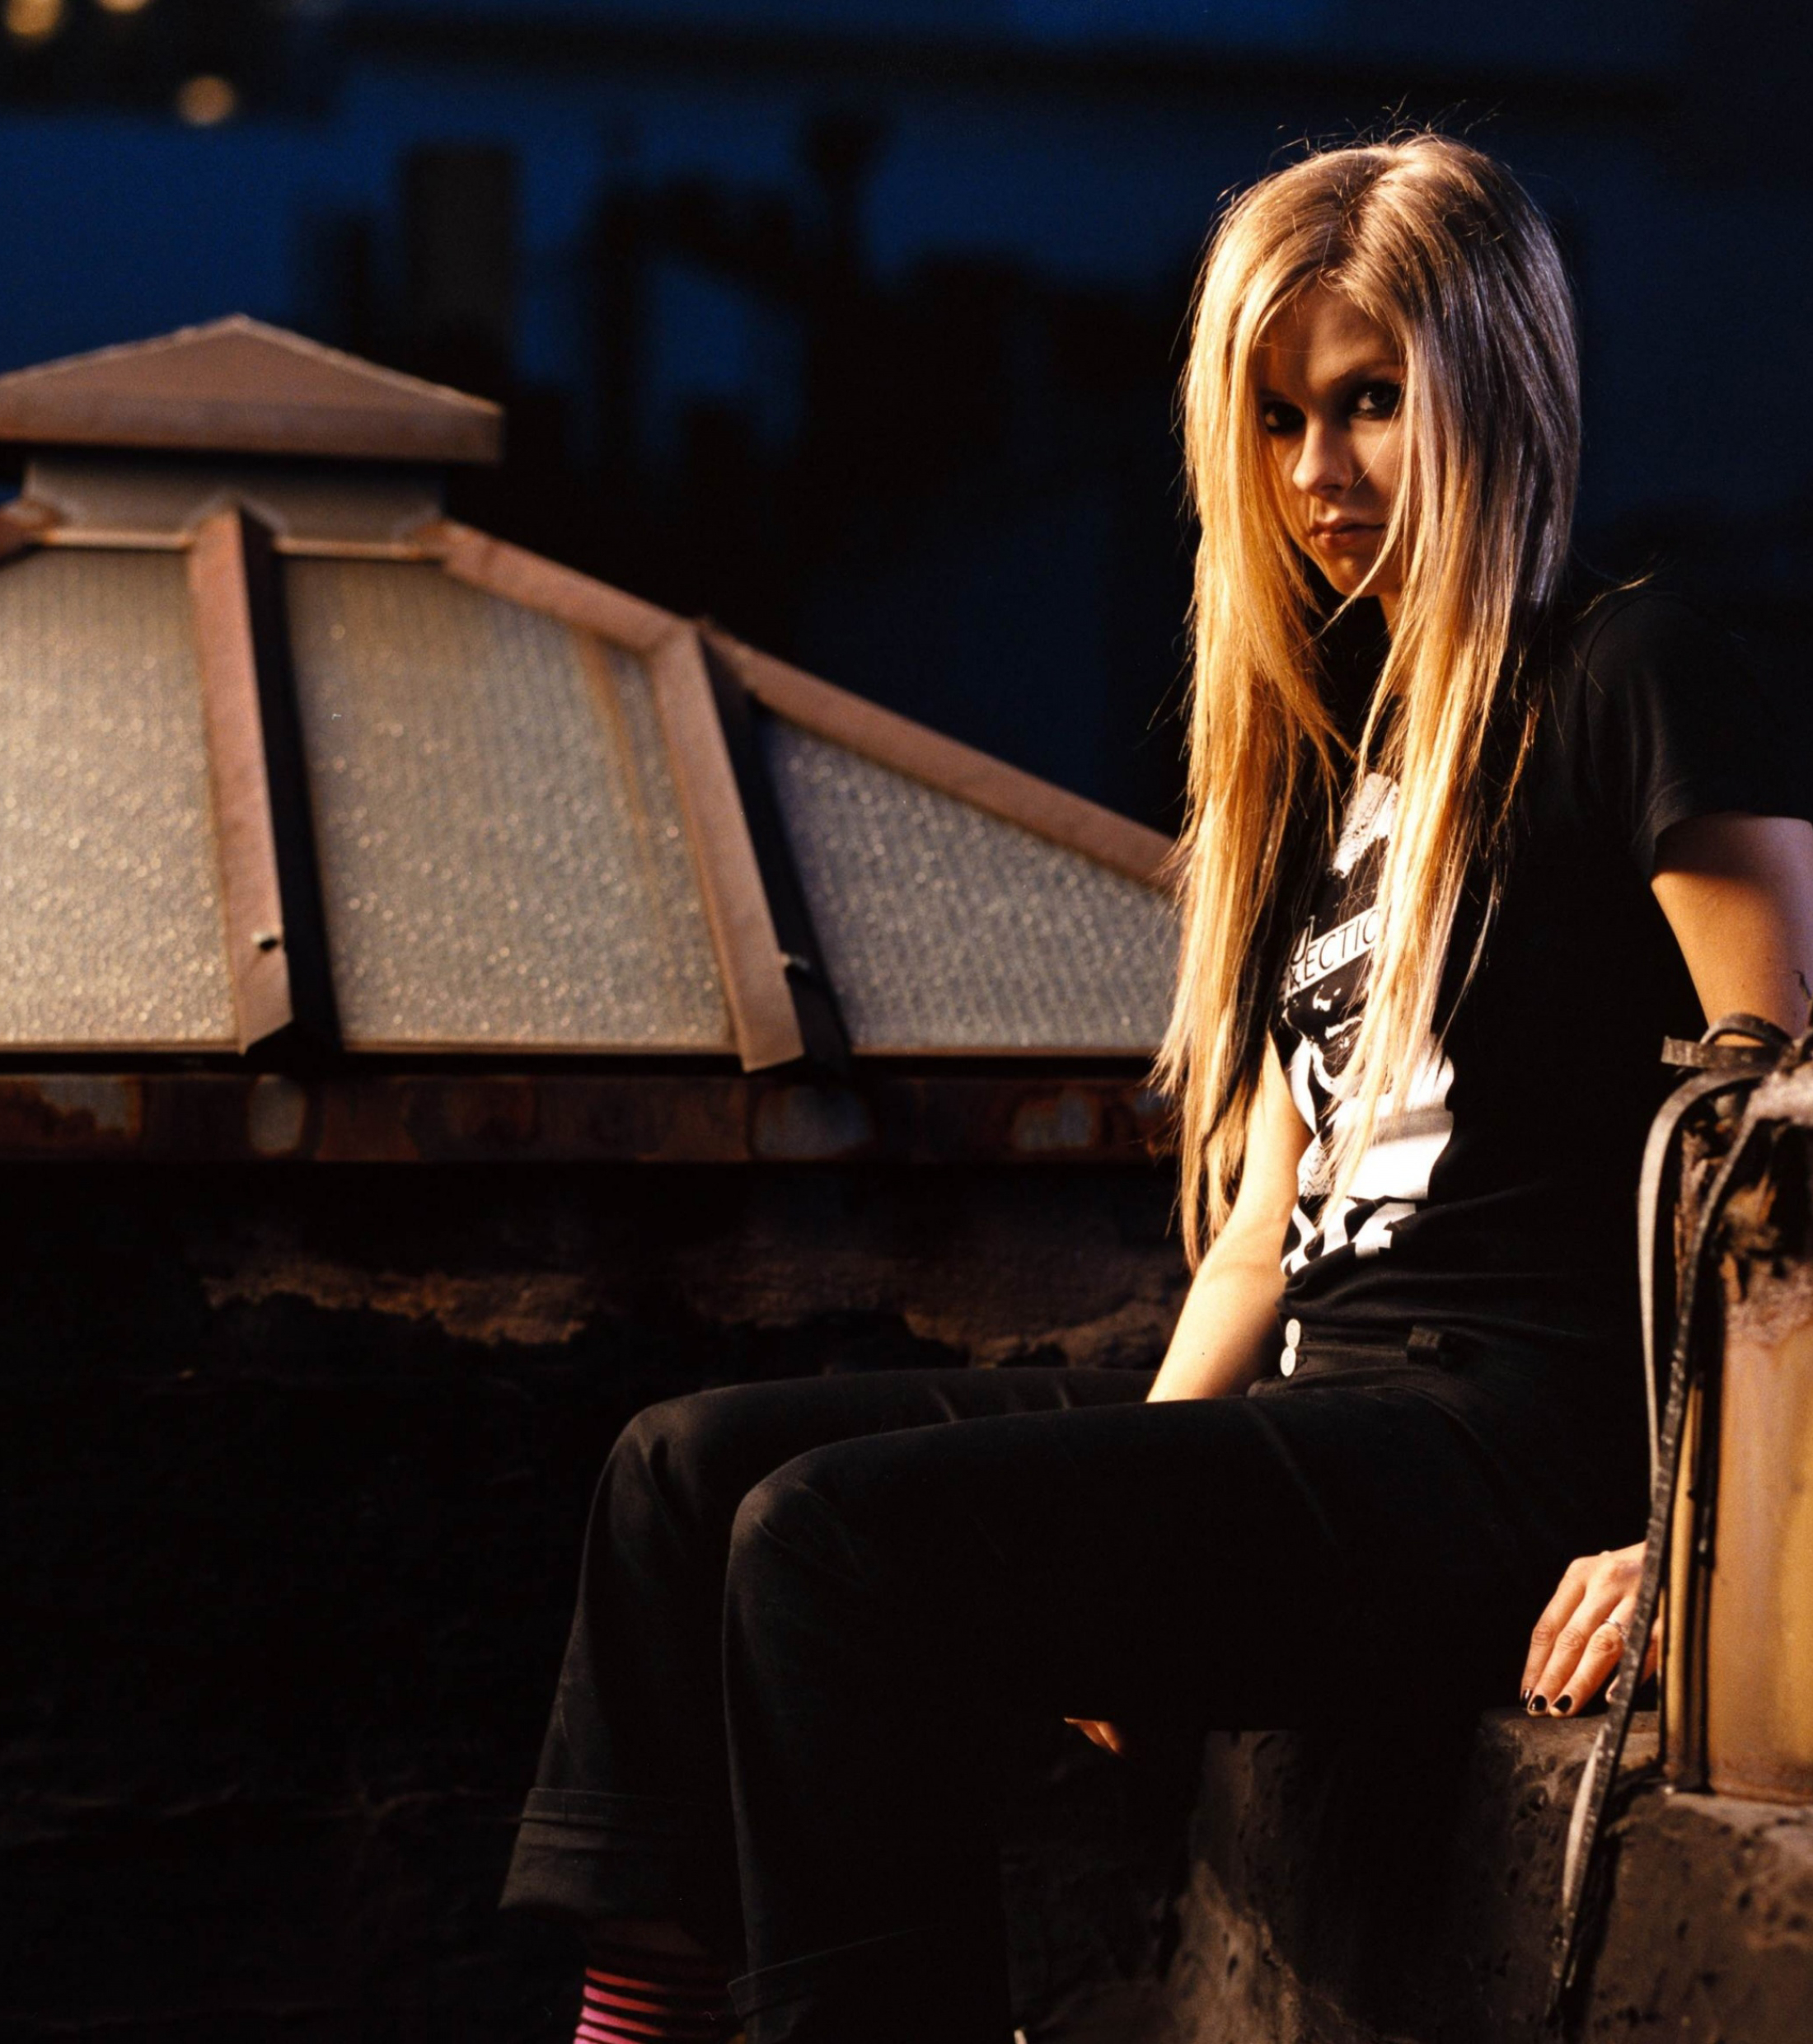 20x2480 Avril Lavigne New Hd Wallpapers 20x2480 Resolution Wallpaper Hd Celebrities 4k Wallpapers Images Photos And Background Wallpapers Den